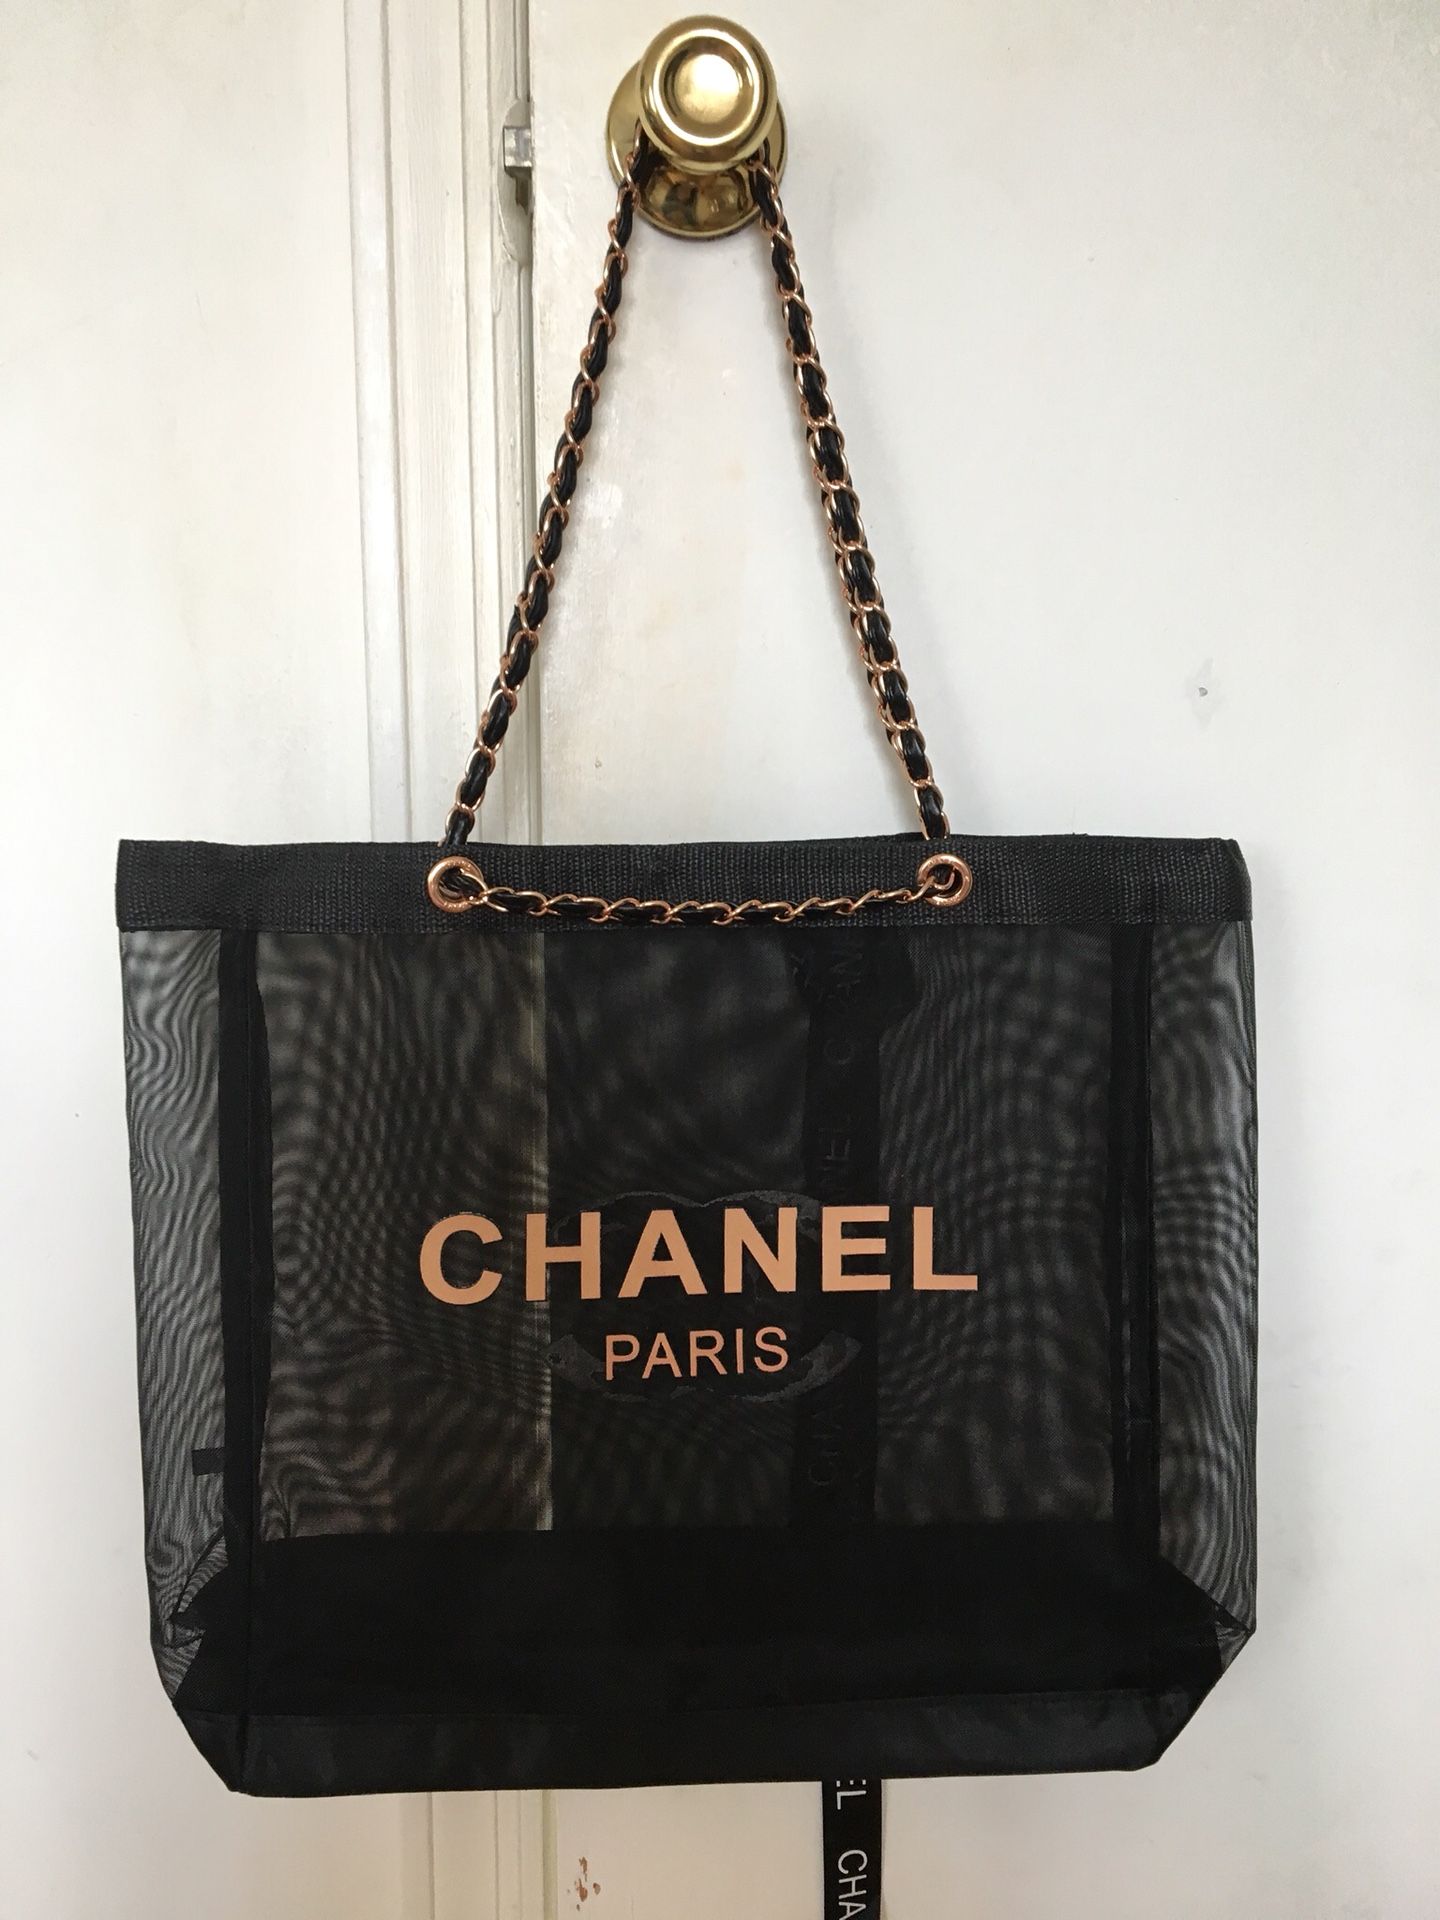 Authentic BRAND NEW/ NEVER USED VIP GIFT Chanel Mesh Tote!